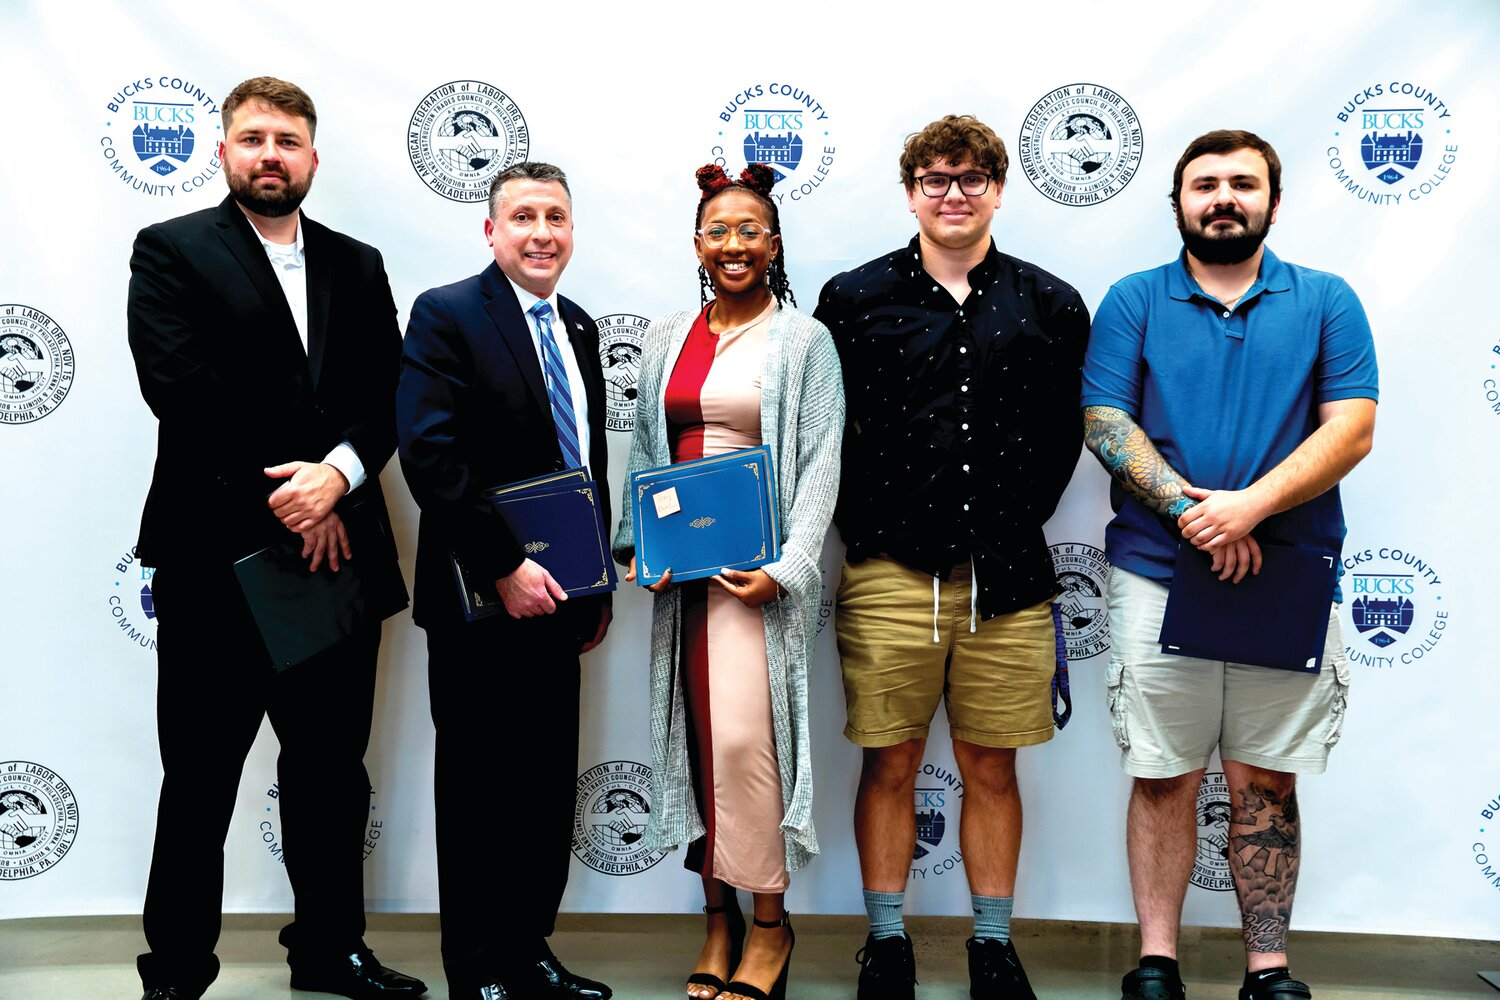 Bucks County Community College celebrated Building and Construction Trades Pre-Apprenticeship program students during their inaugural cohort graduation June 15.